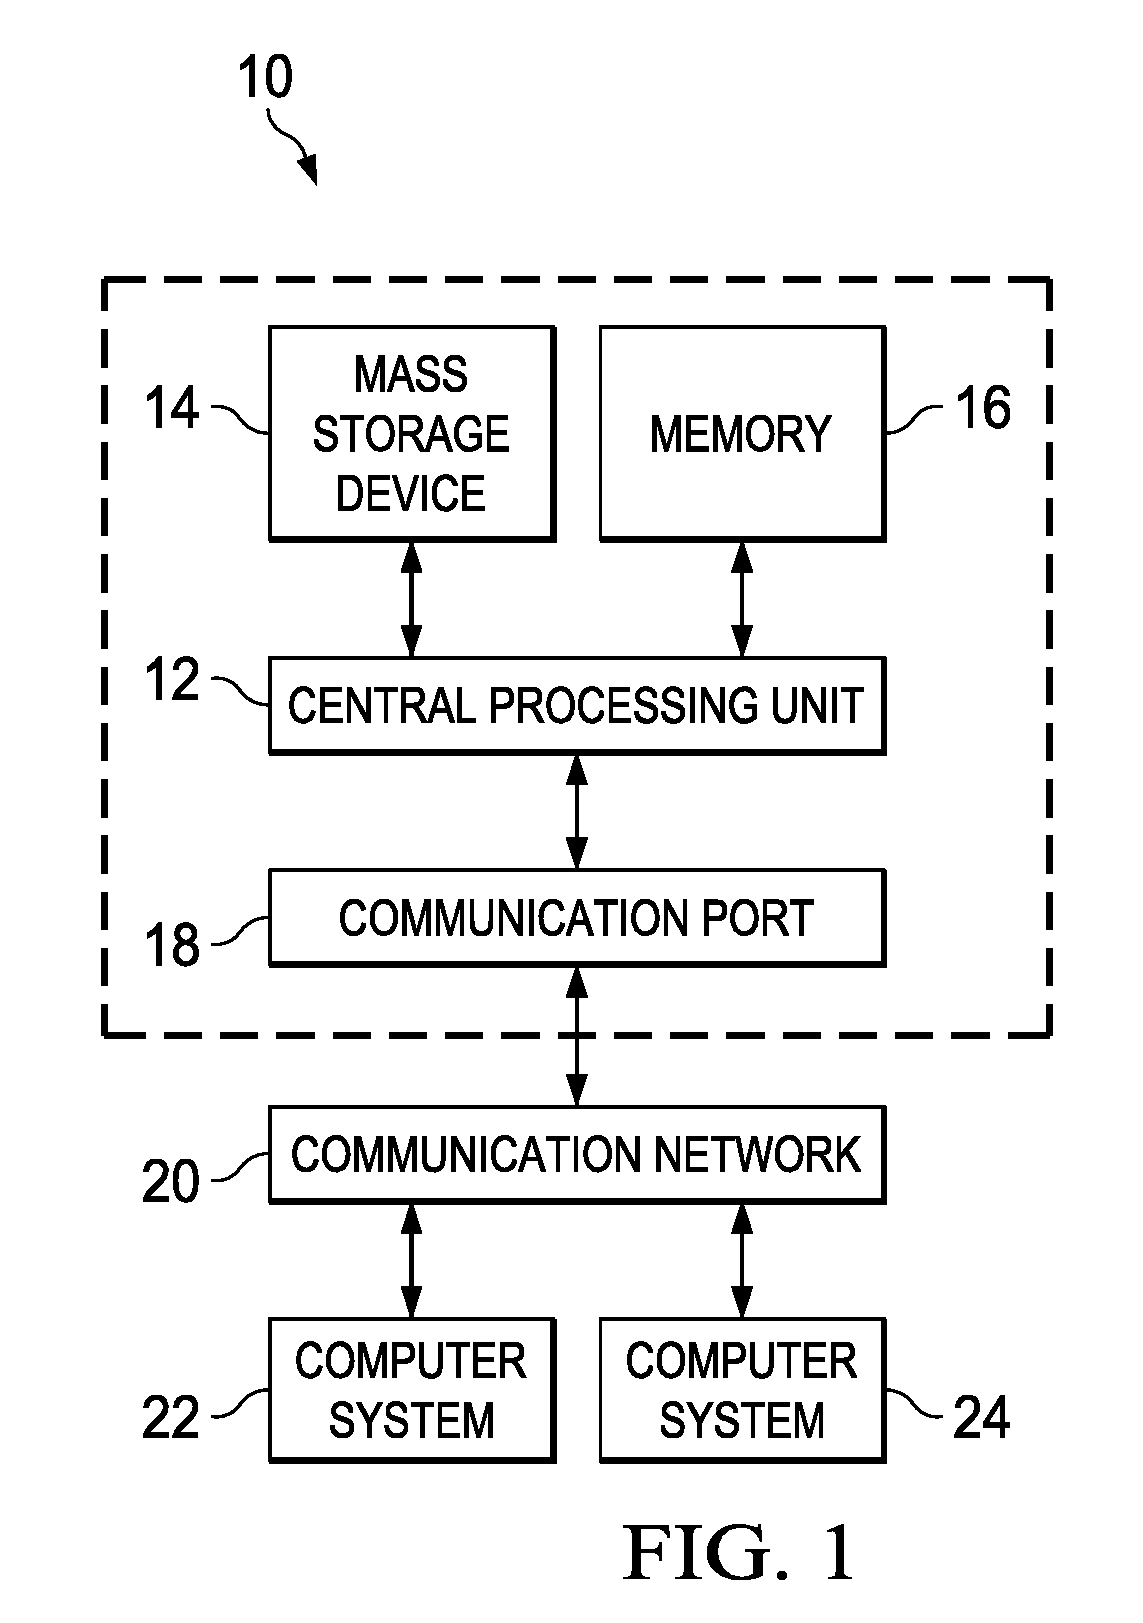 Dynamically provisioning and scaling graphic processing units for data analytic workloads in a hardware cloud